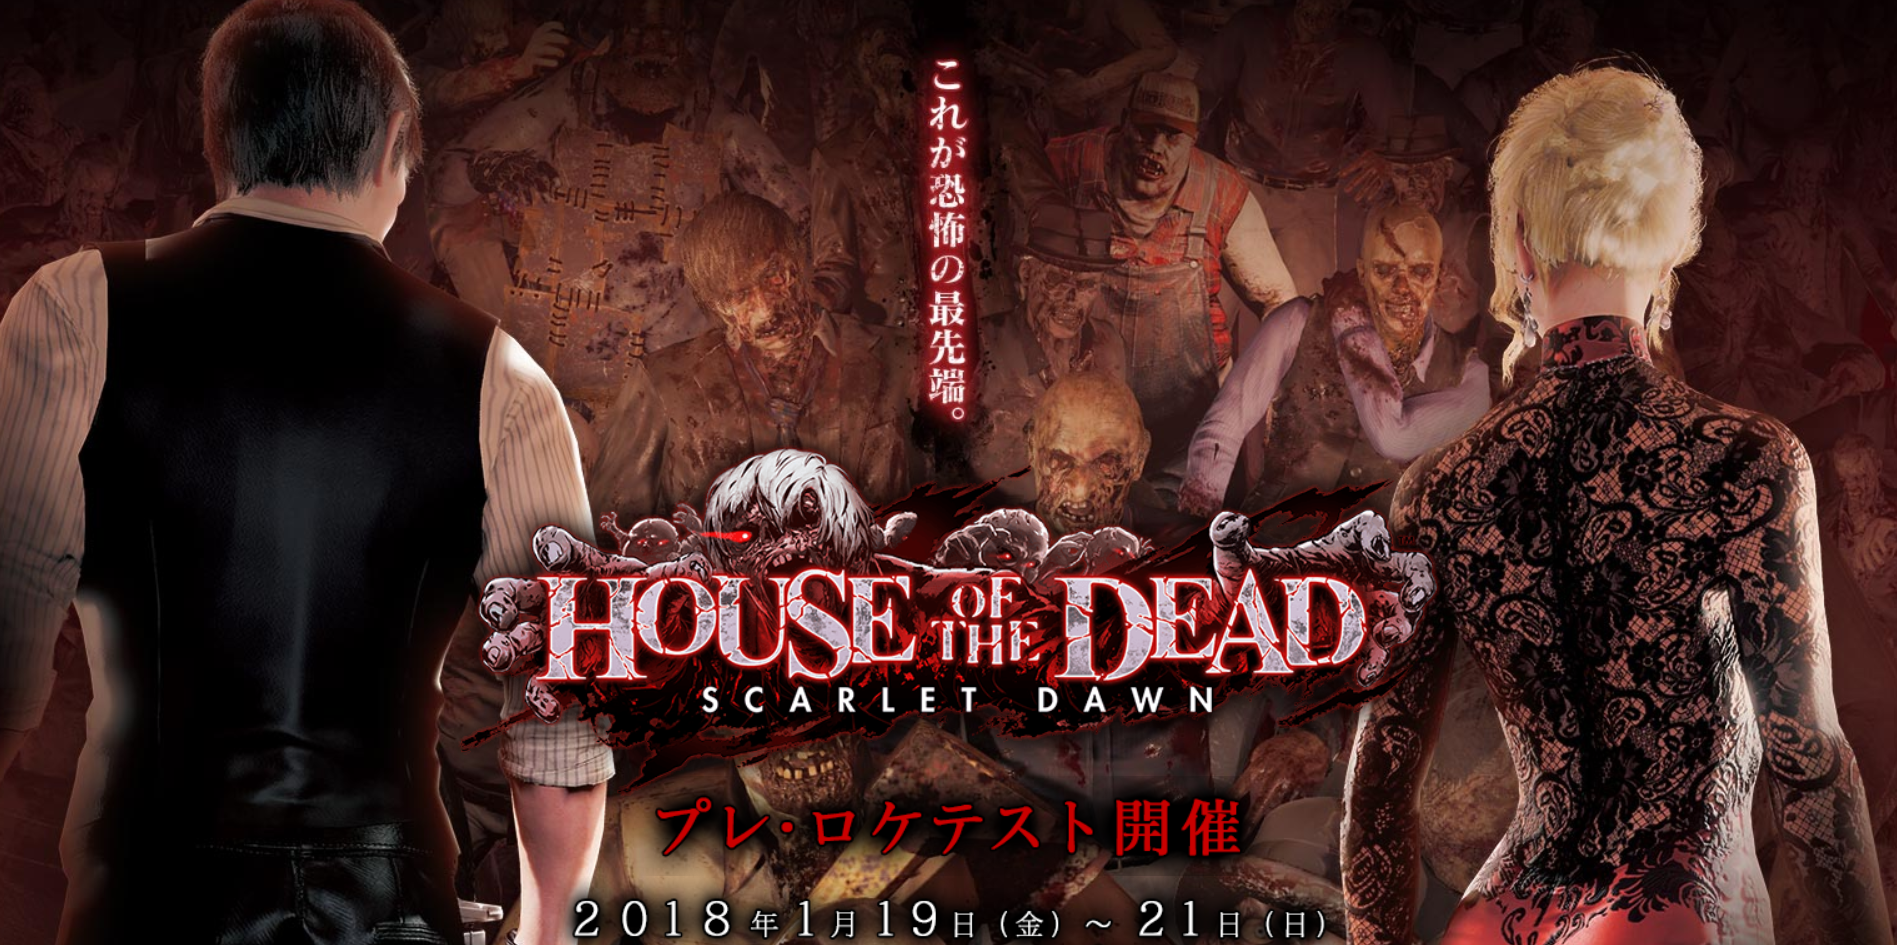 House of the Dead: Scarlet Dawn